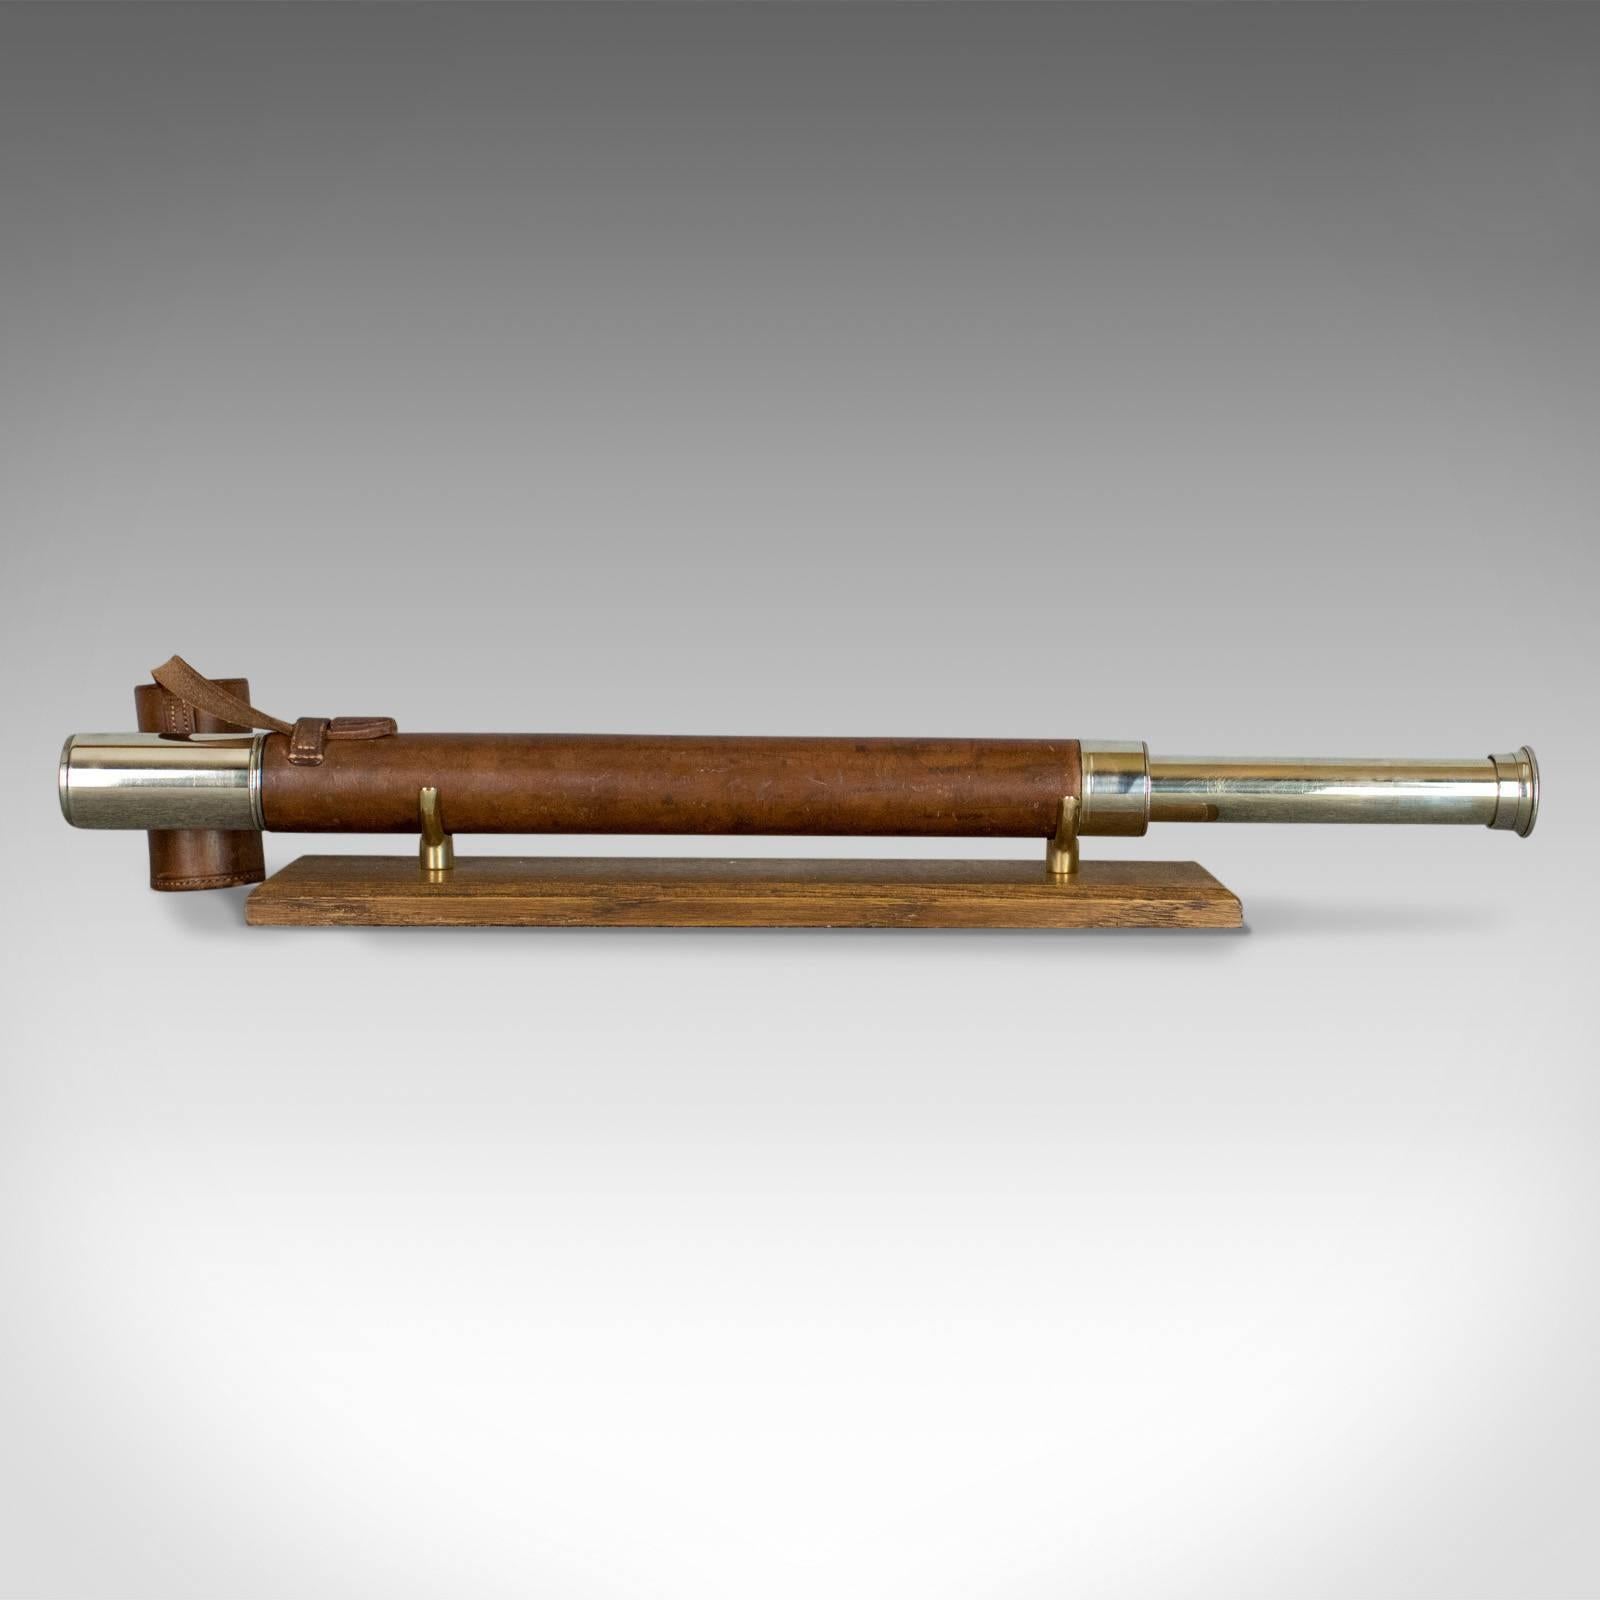 This is an antique telescope, a single draw refractor for terrestrial or astronomical use. An English, 'Officer of the Watch' telescope dating to the early 20th century.

Perfect for bird watching, landscape appreciation, wildlife, or maritime